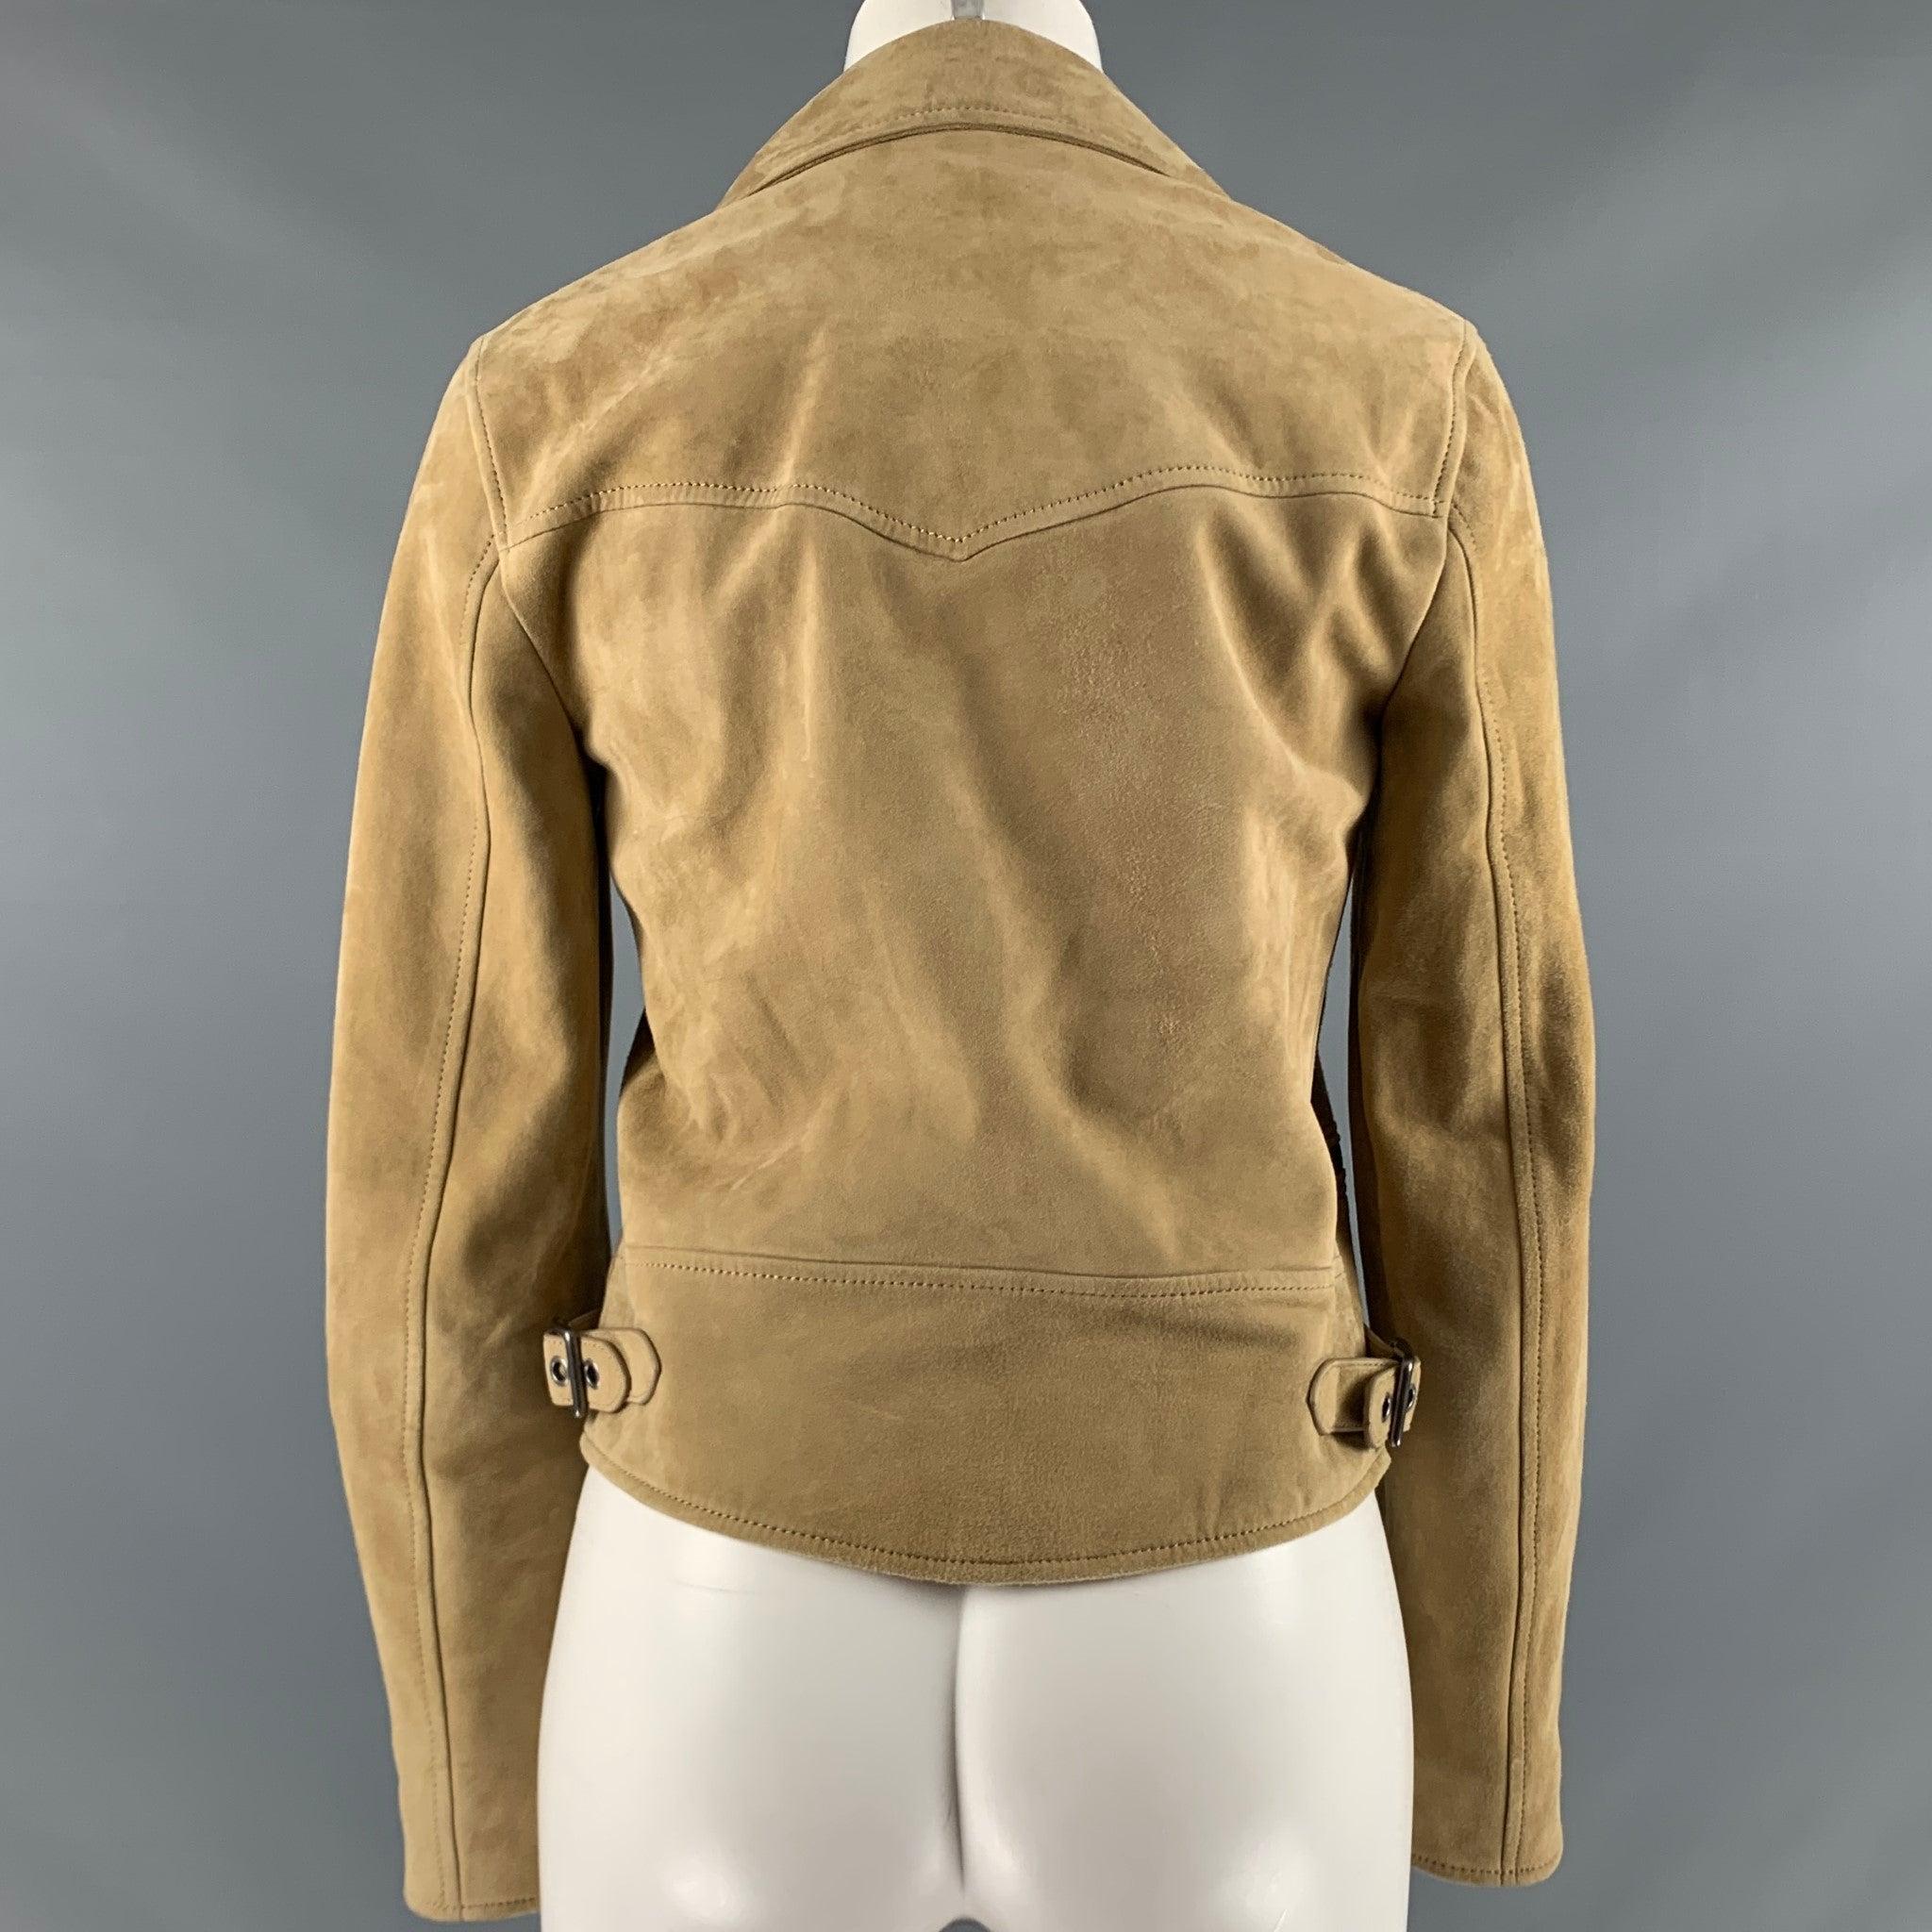 COACH Size 2 Tan Suede Lamb Skin Biker Jacket In Excellent Condition For Sale In San Francisco, CA